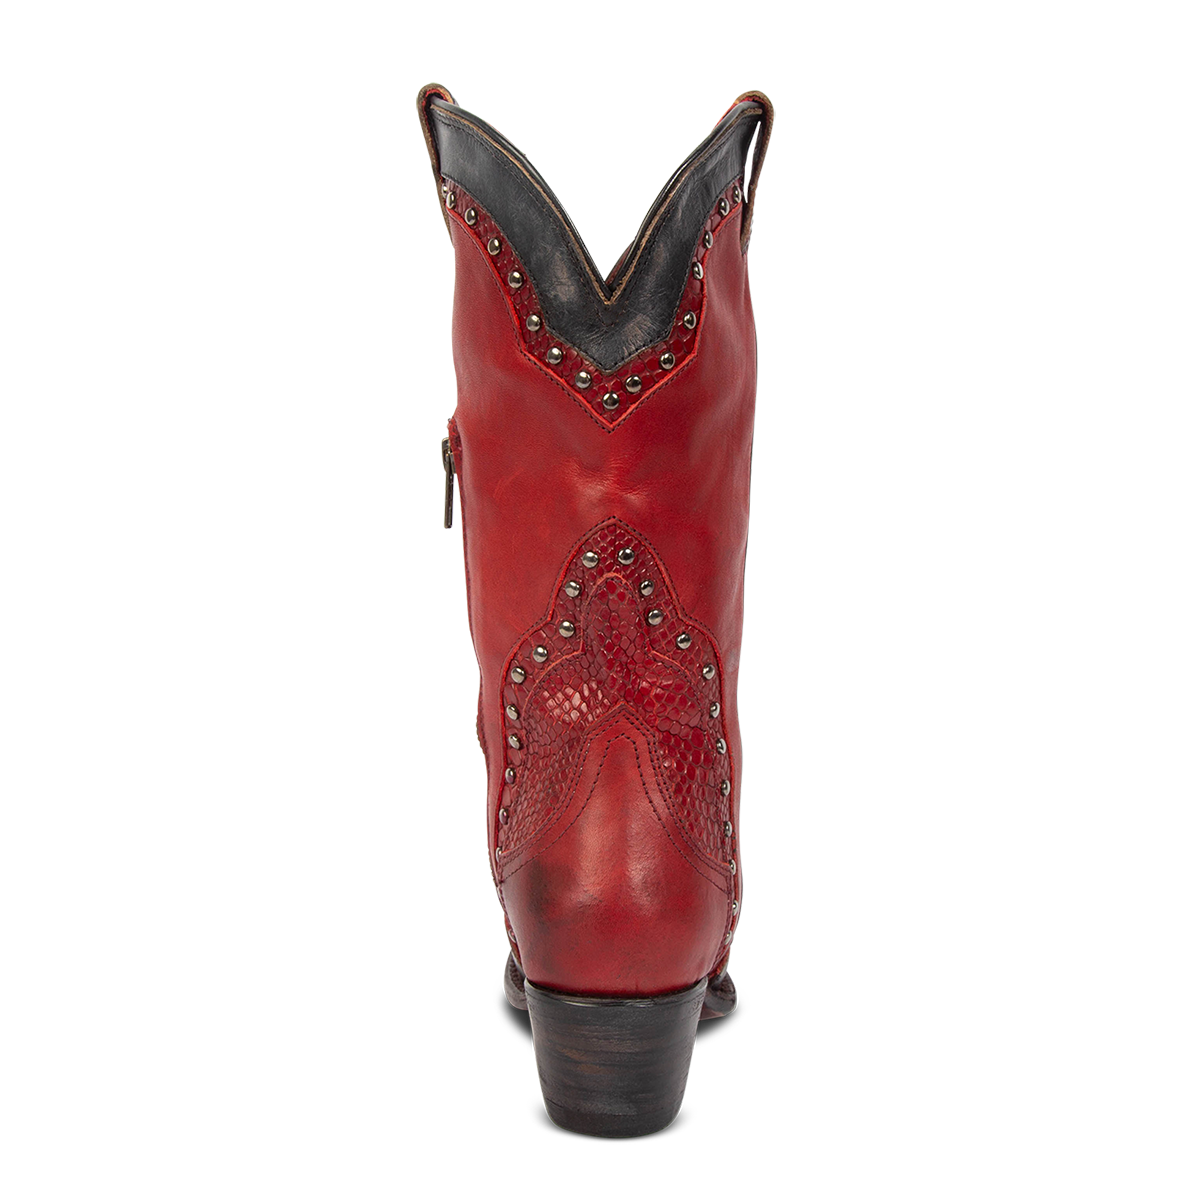 Back view showing back dip and low heel with embossed leather detailing on FREEBIRD women's Warner red multi leather western cowboy boot